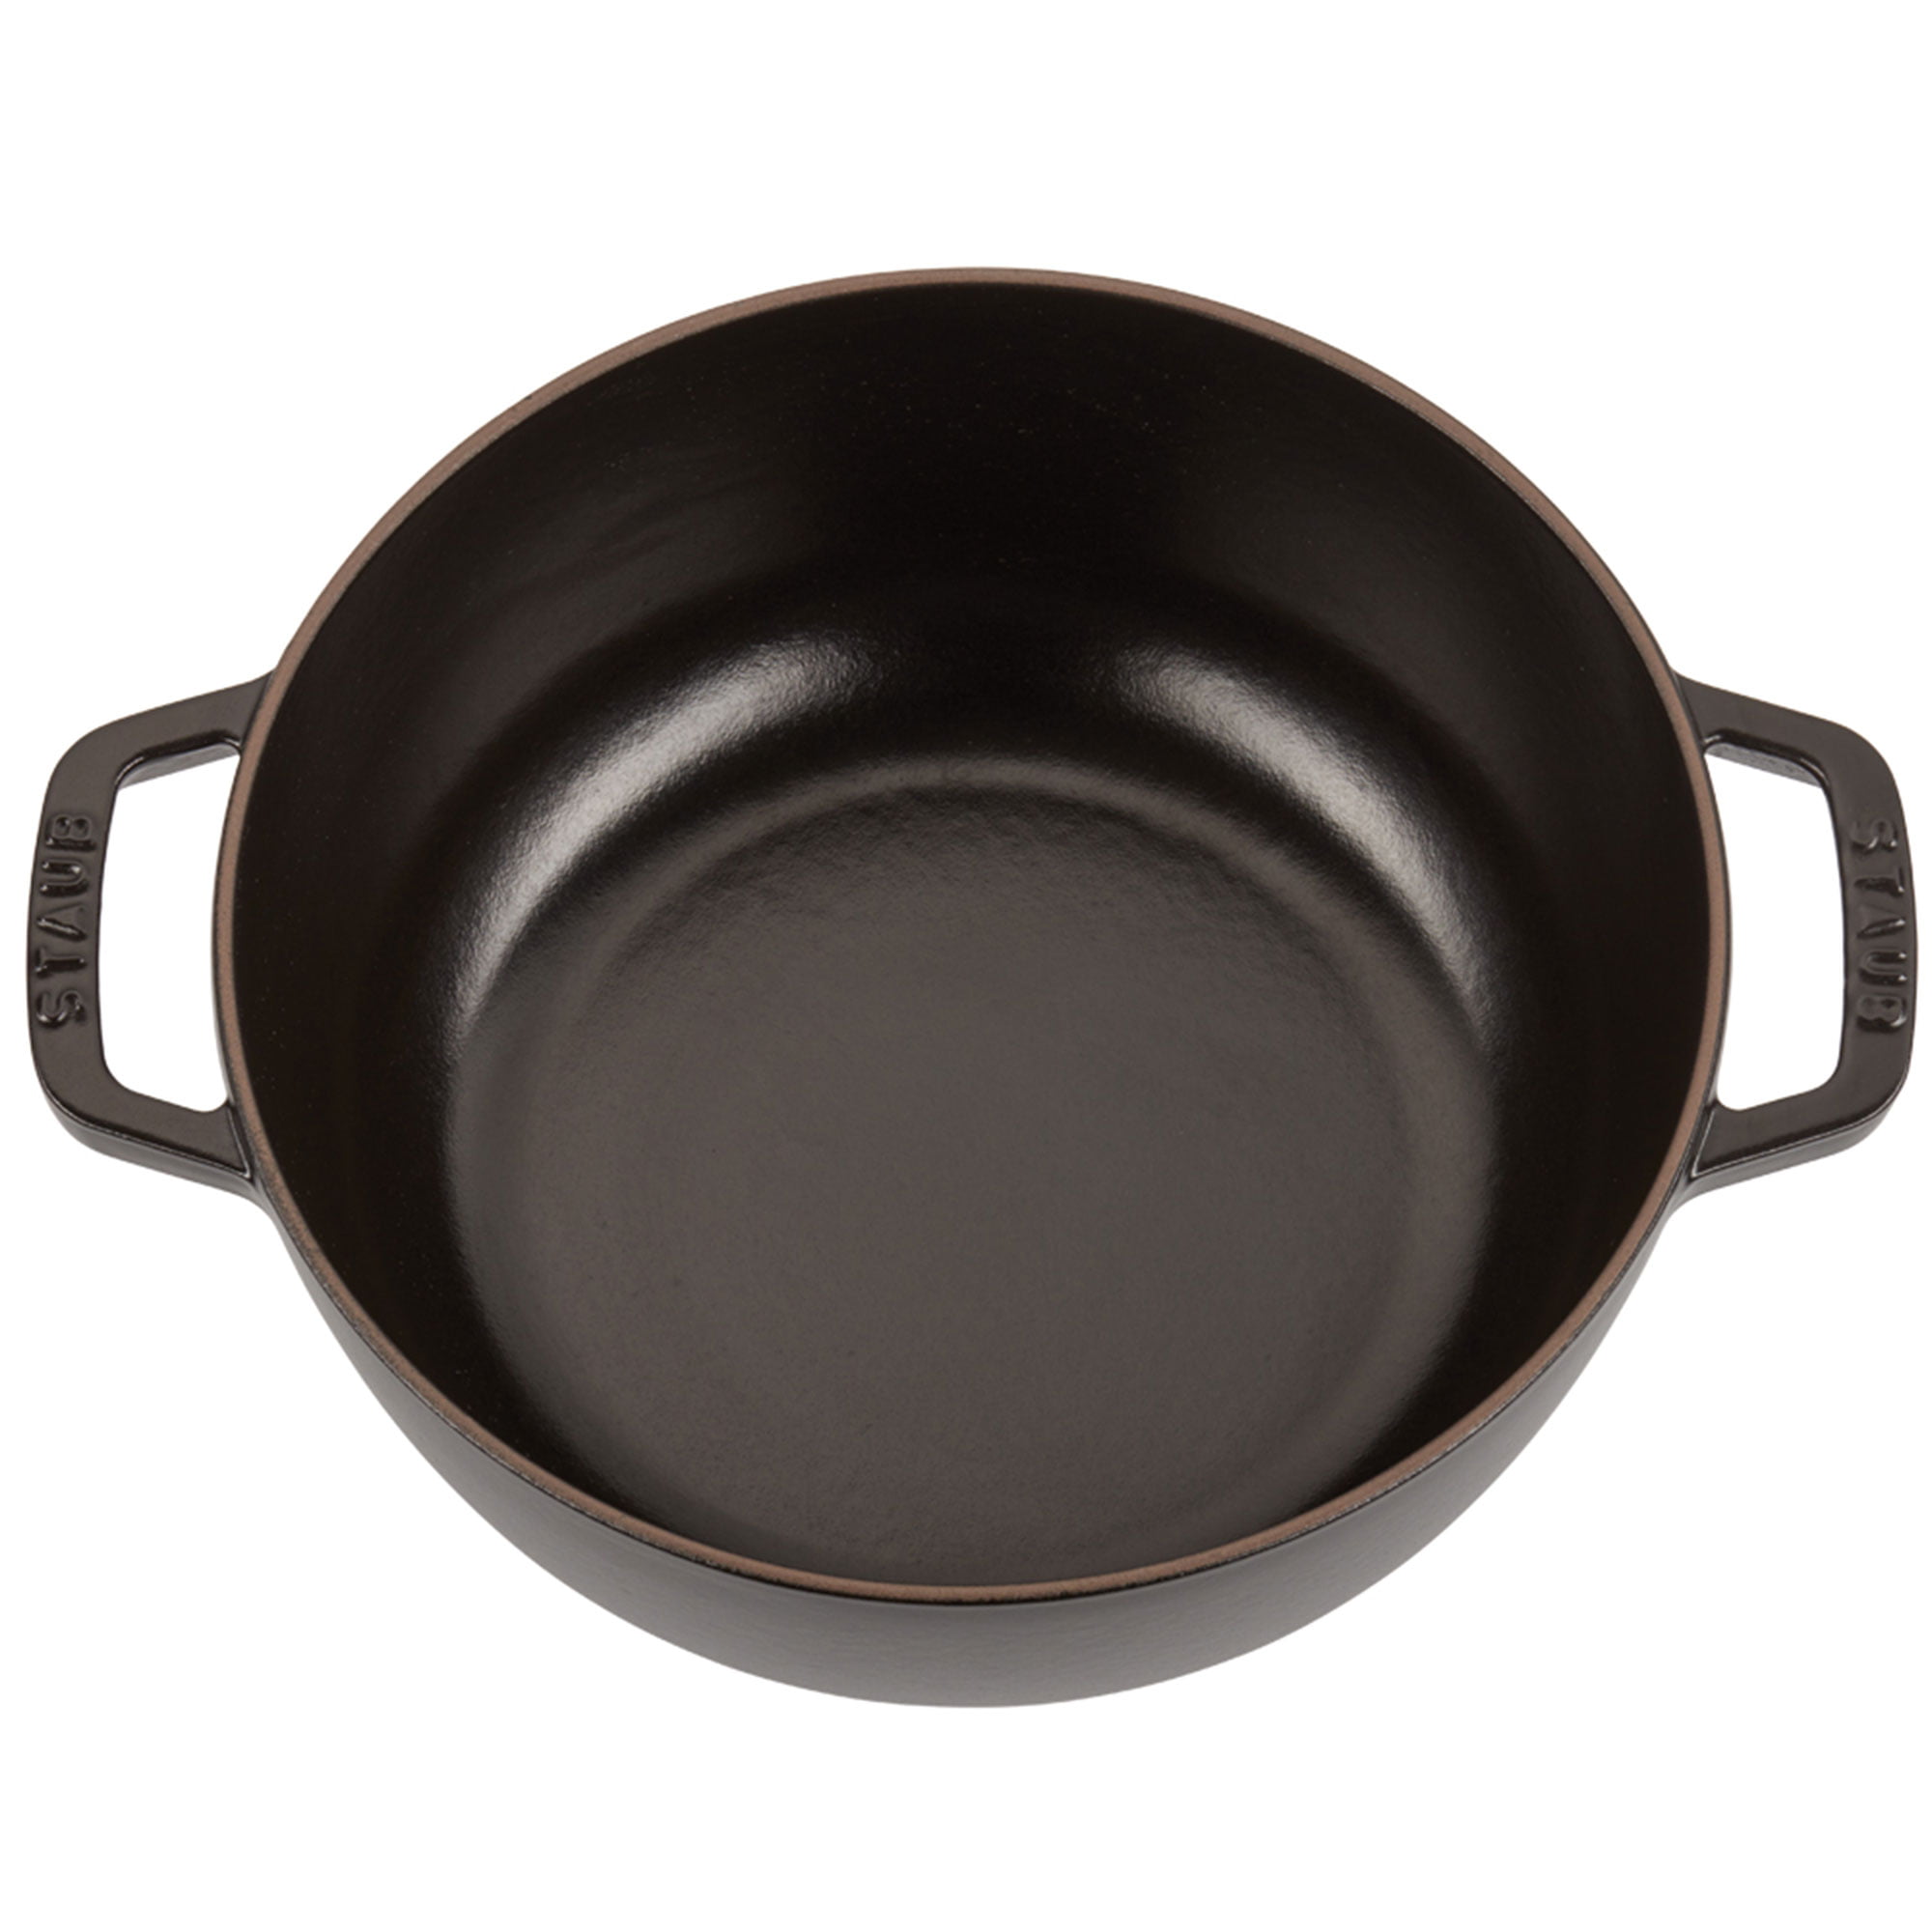 Staub Cast Iron 4.75-inch Mini Frying Pan - Matte Black, Made in France